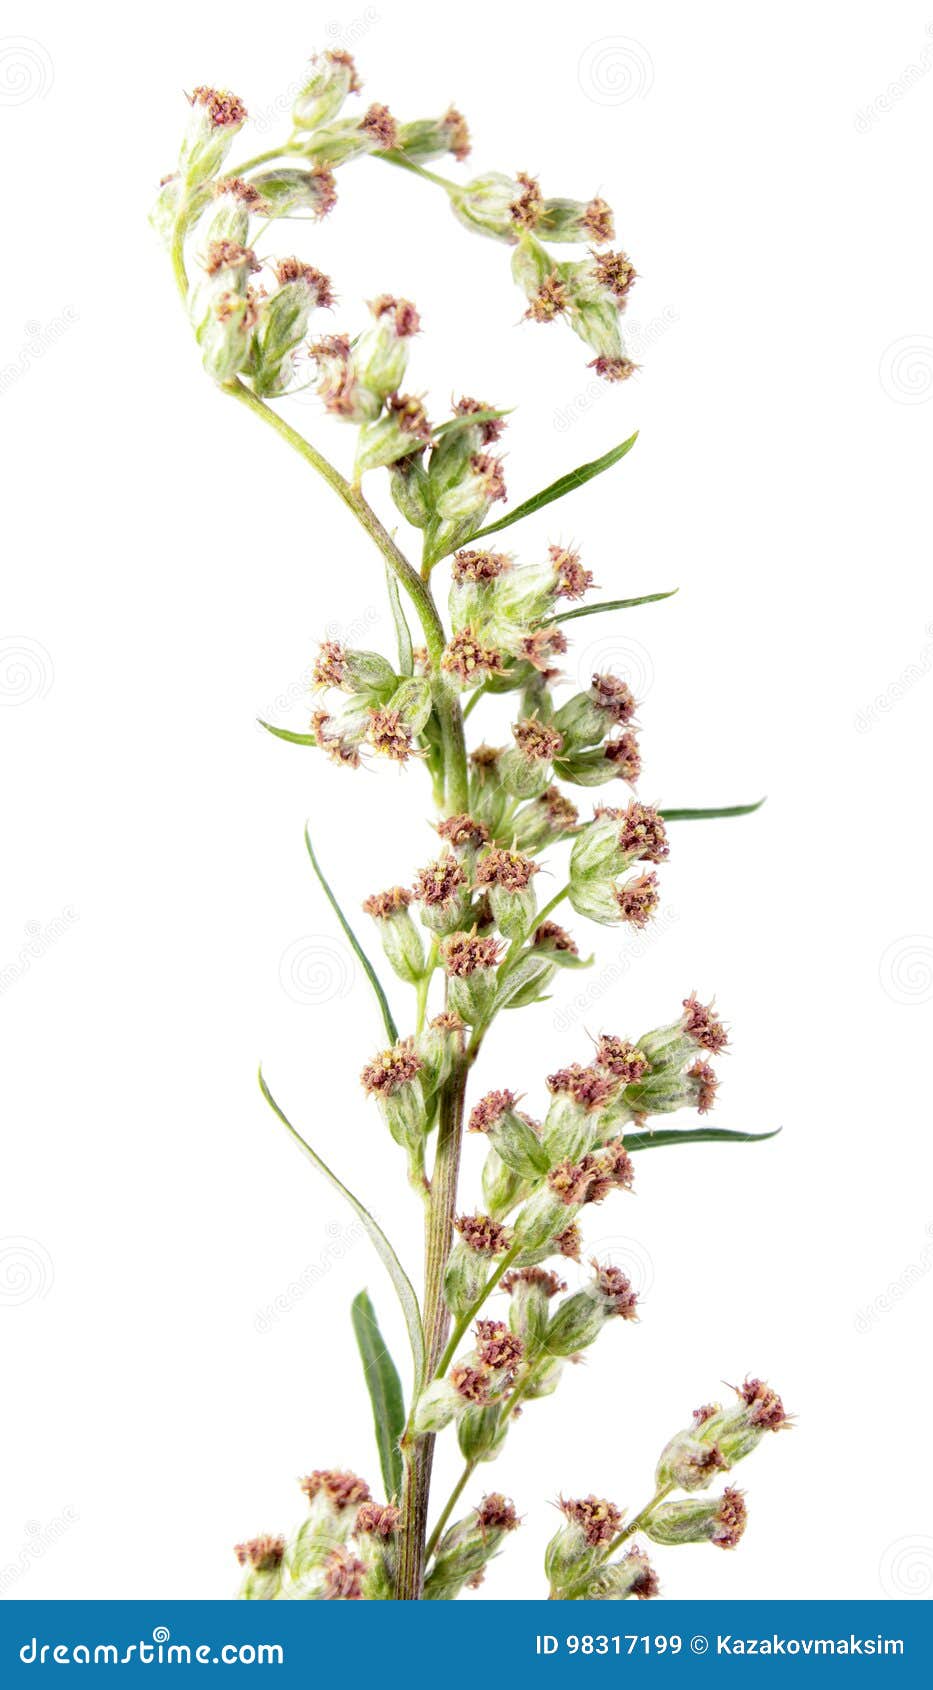 Flowers Of Common Wormwood Or Artemisia Vulgaris Isolated On White Background Medicinal Plant Stock Image Image Of Wormwood Herb 98317199